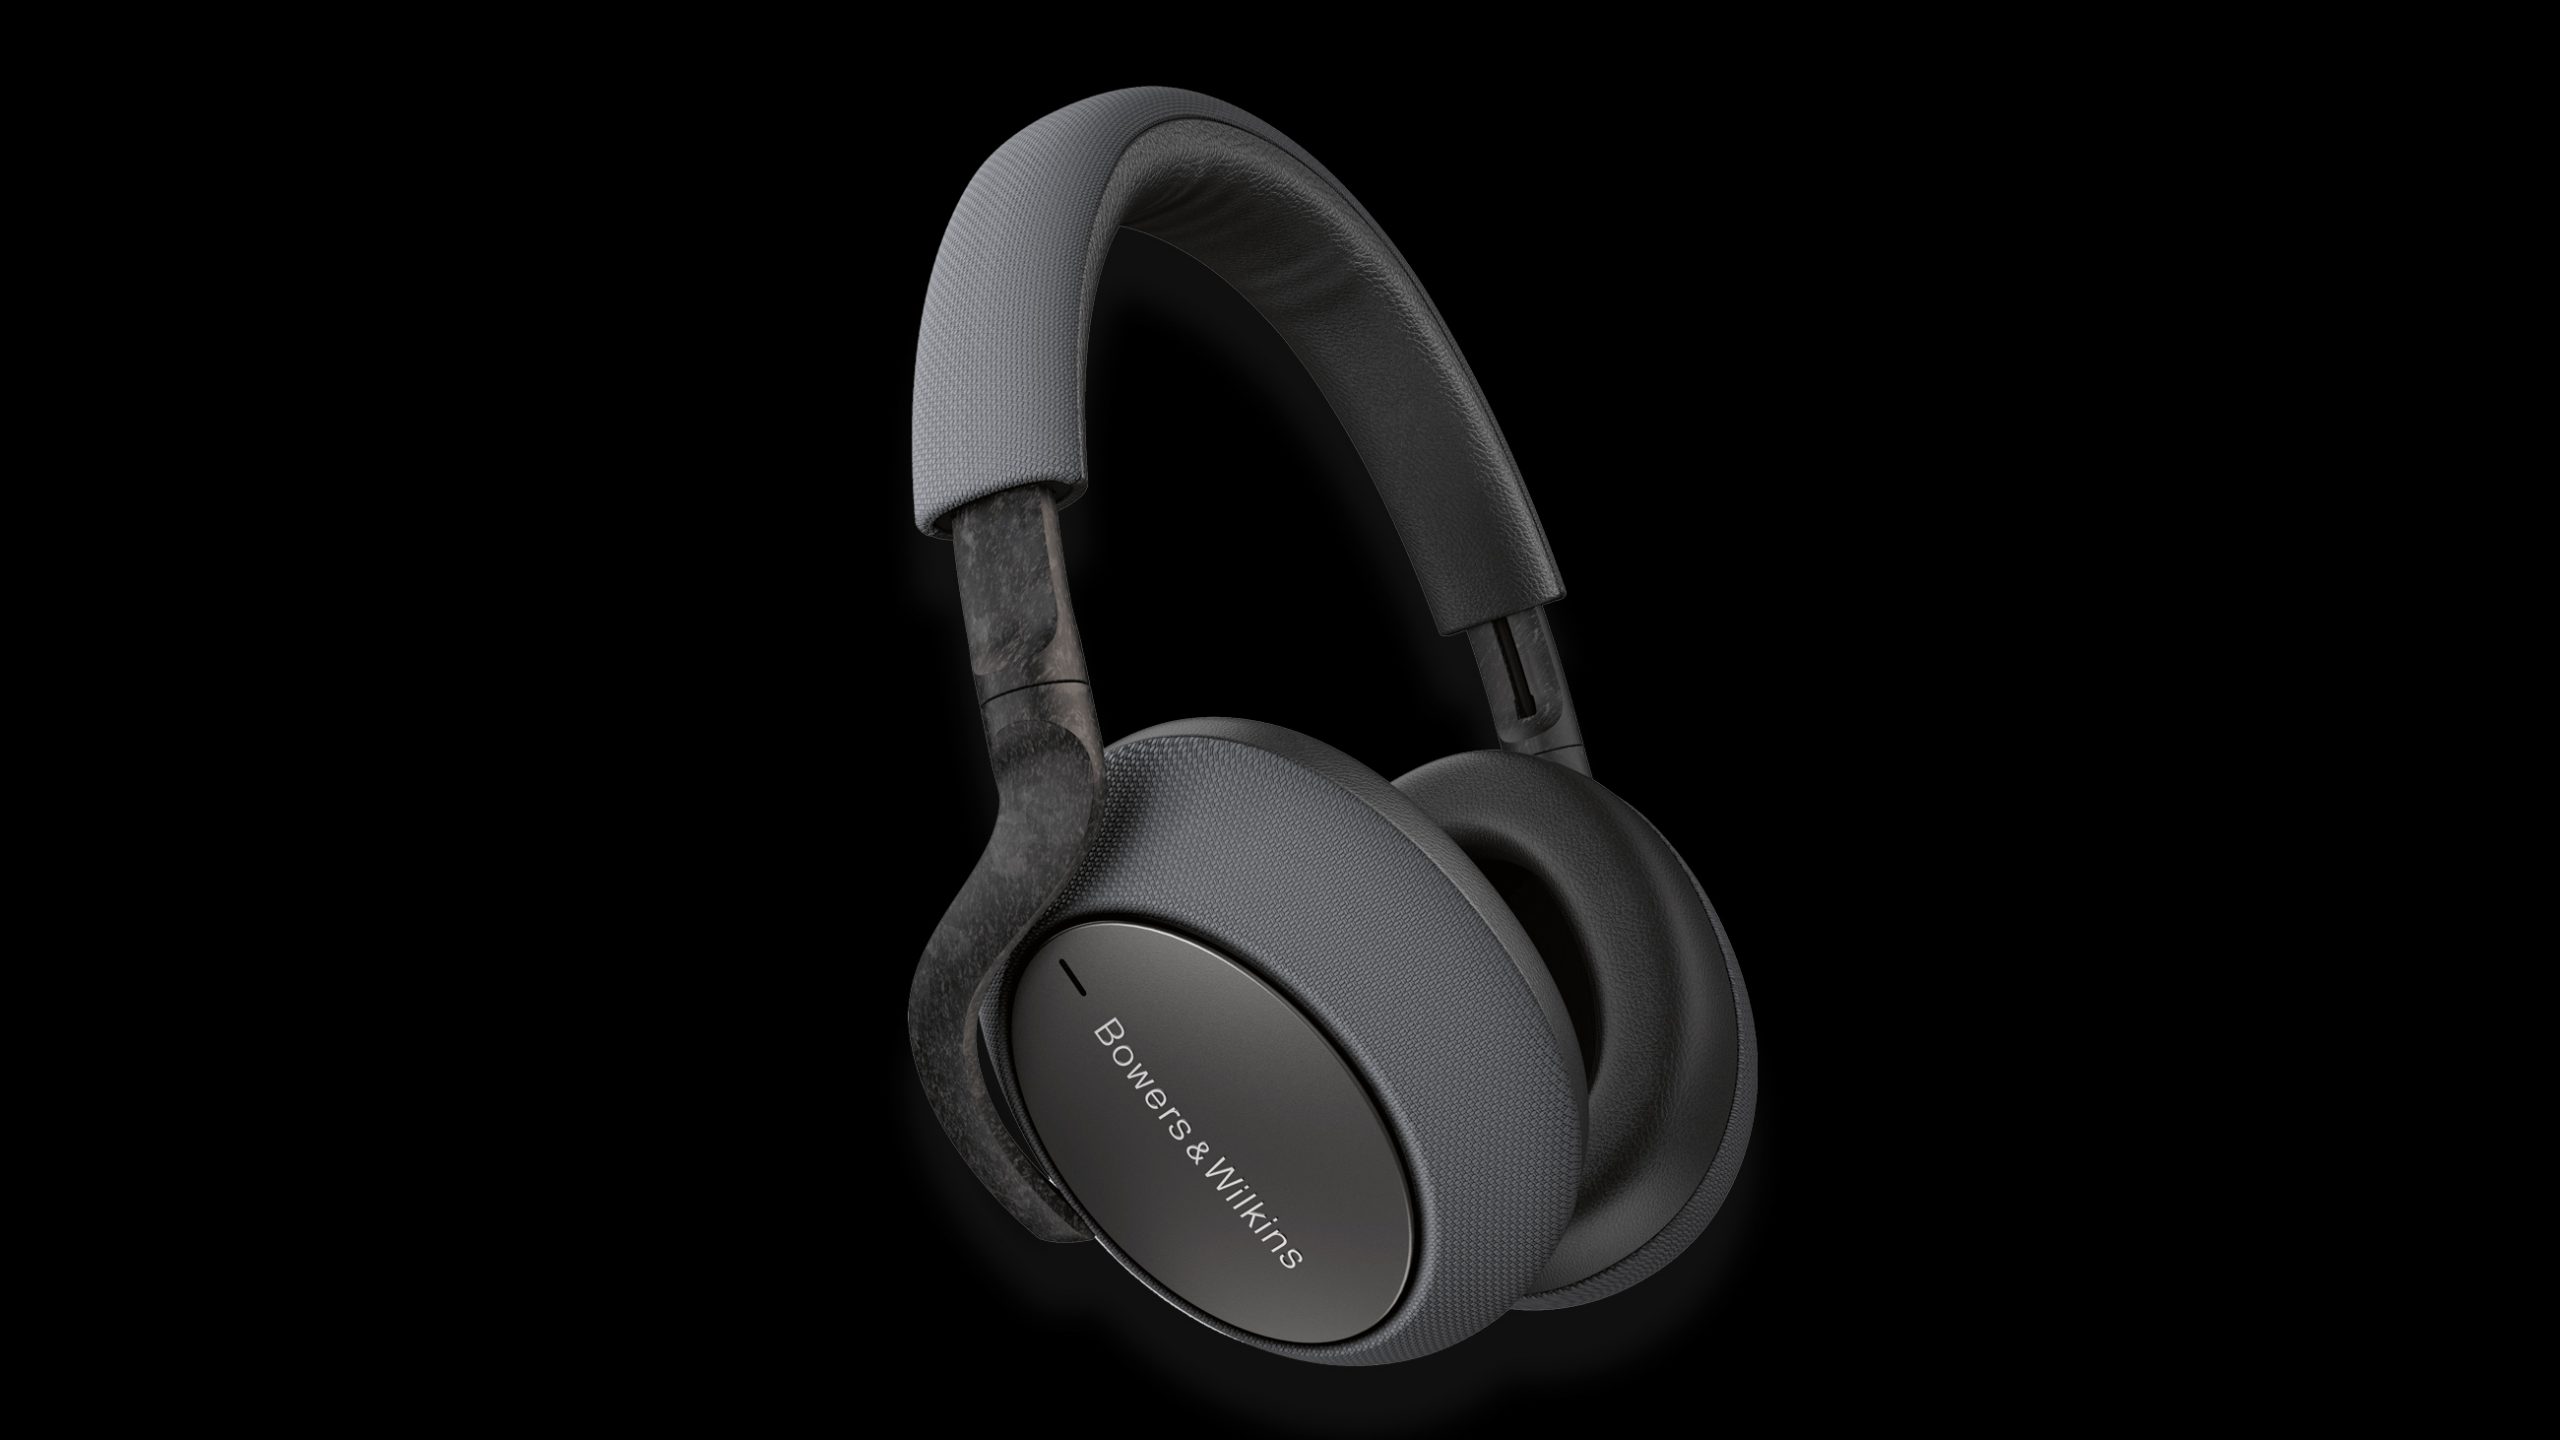 Review: Bowers & Wilkins PX7 | Headphones With A Sense Of Luxury